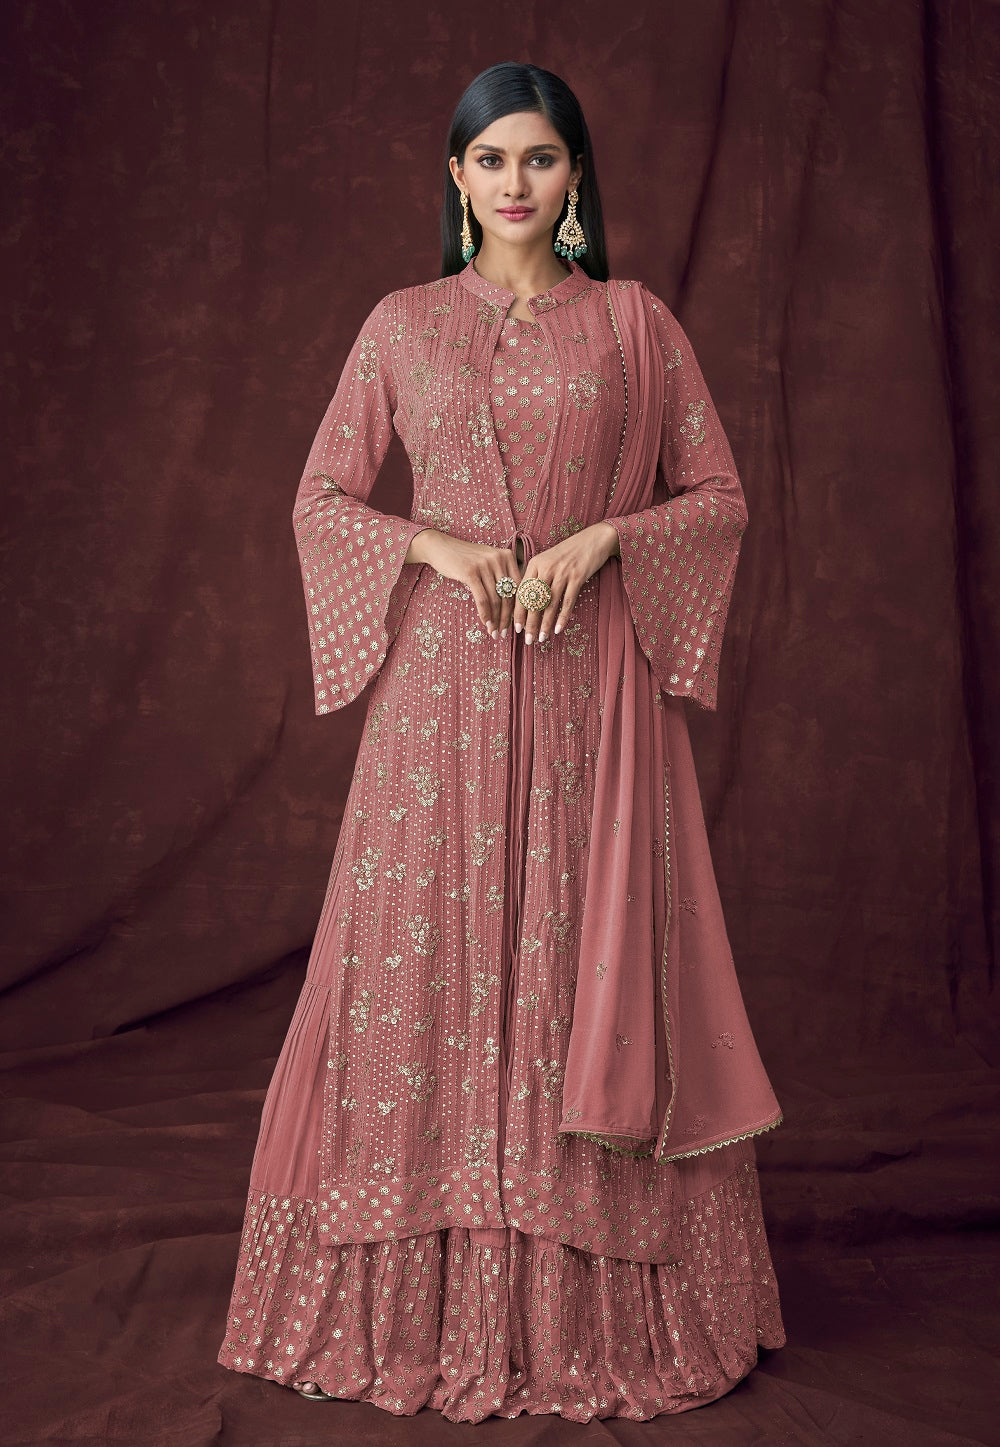 Embroidered Georgette Lehenga in Peach